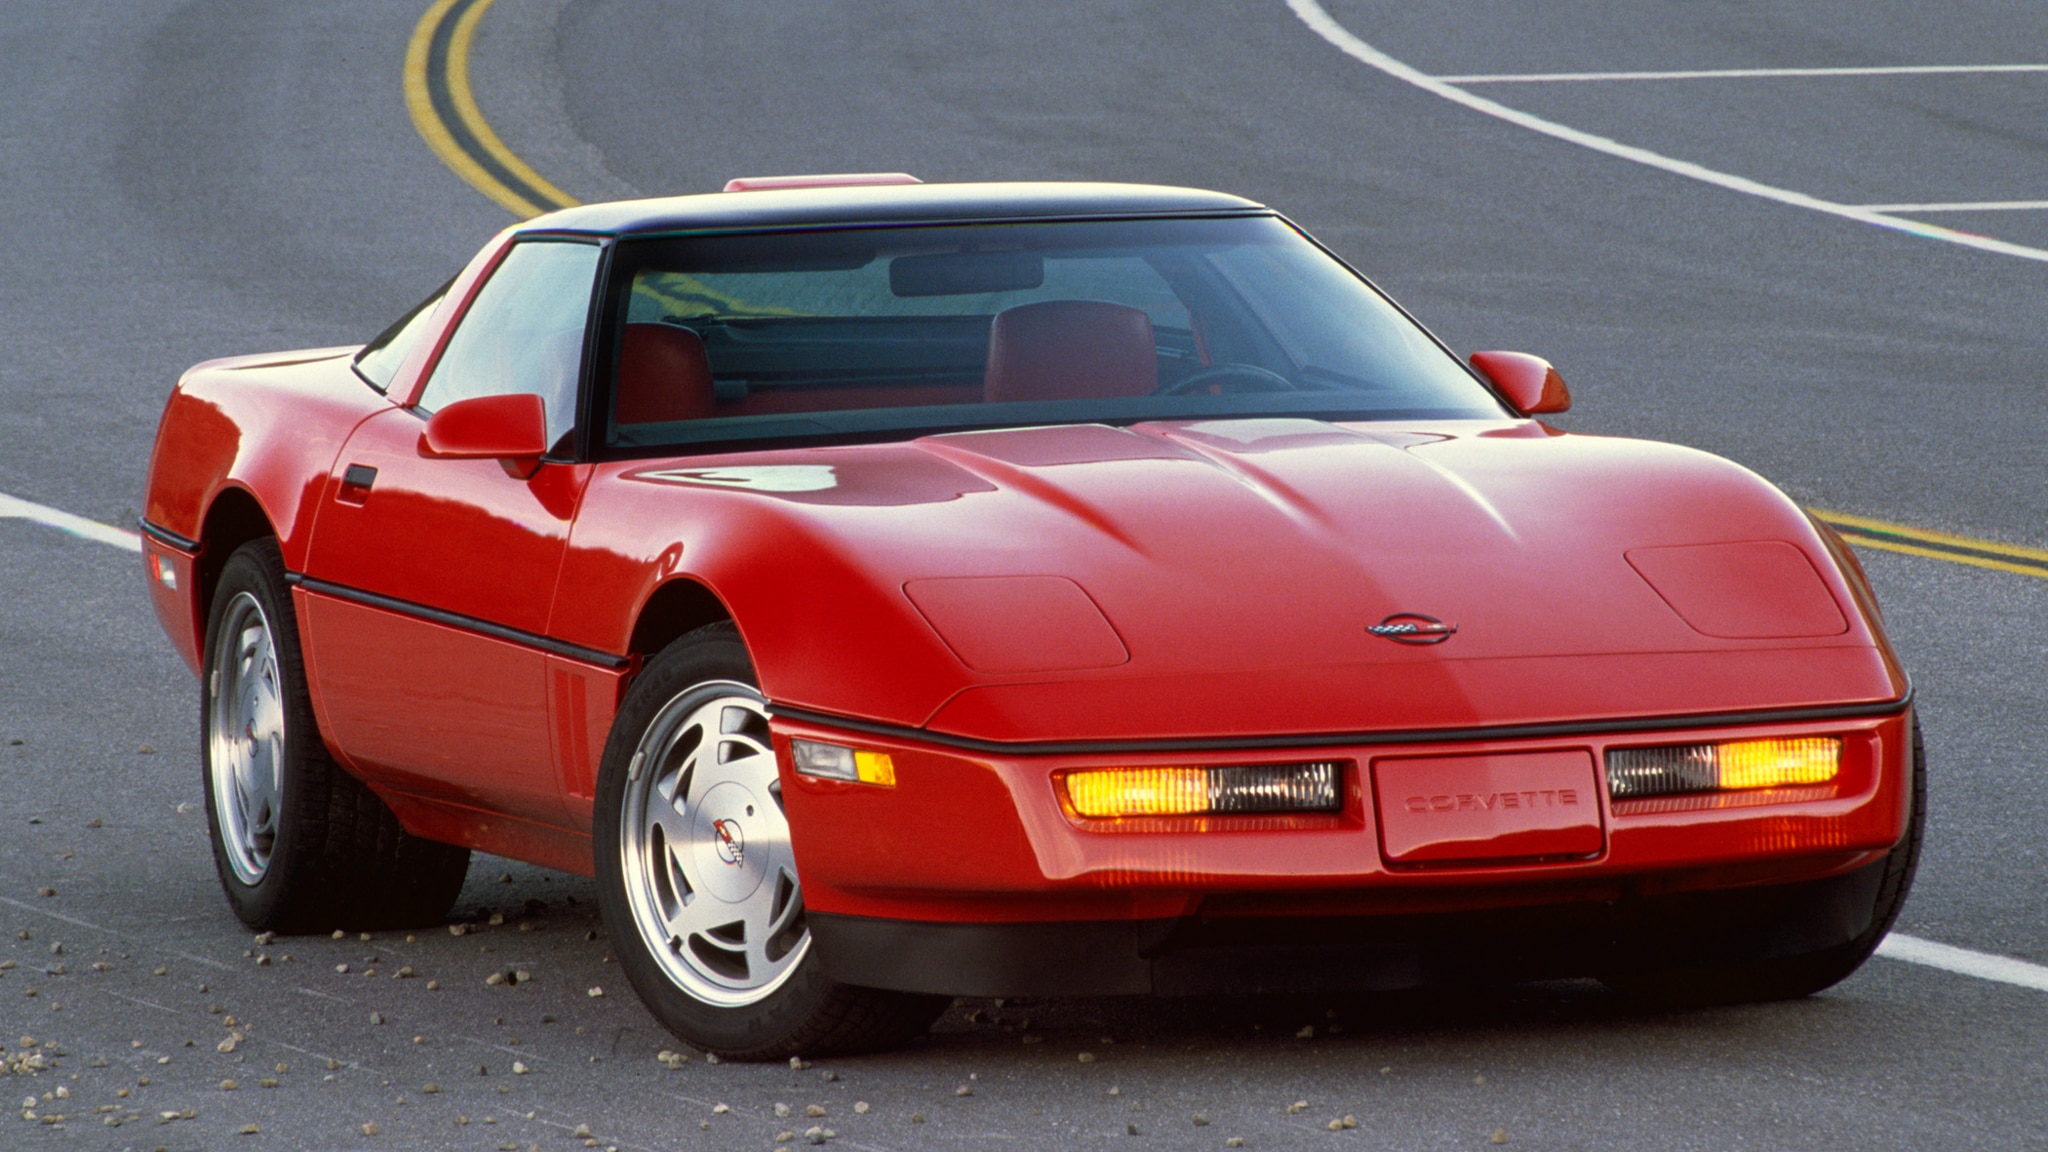 Market Watch: The 1984 1996 Chevrolet Corvette C4 Is A Used Car Bargain